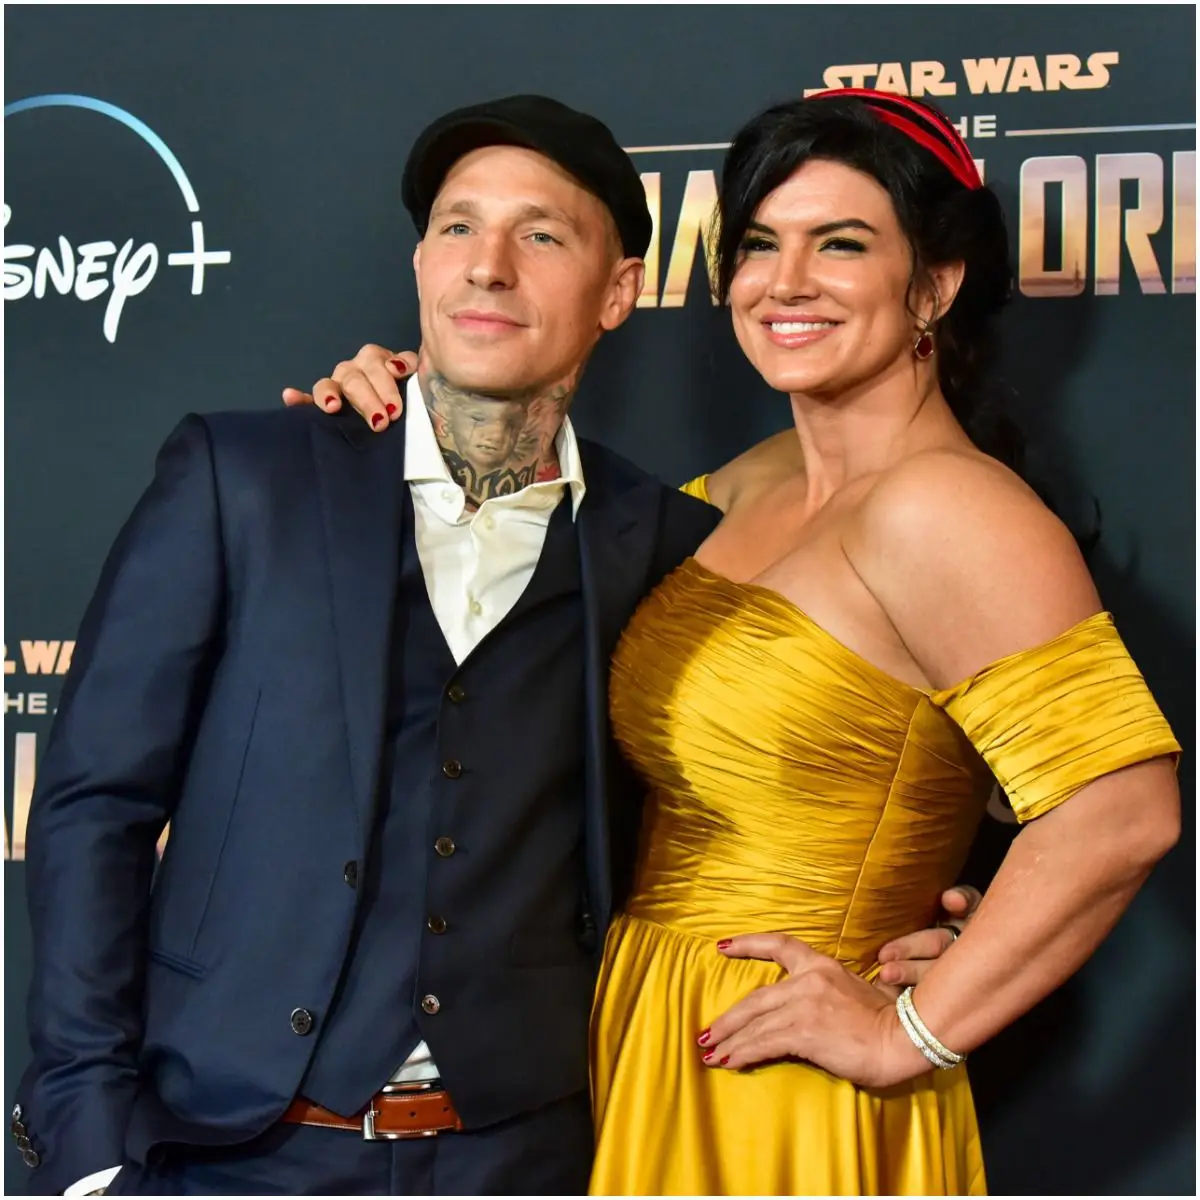 Gina Carano and her boyfriend Kevin Ross